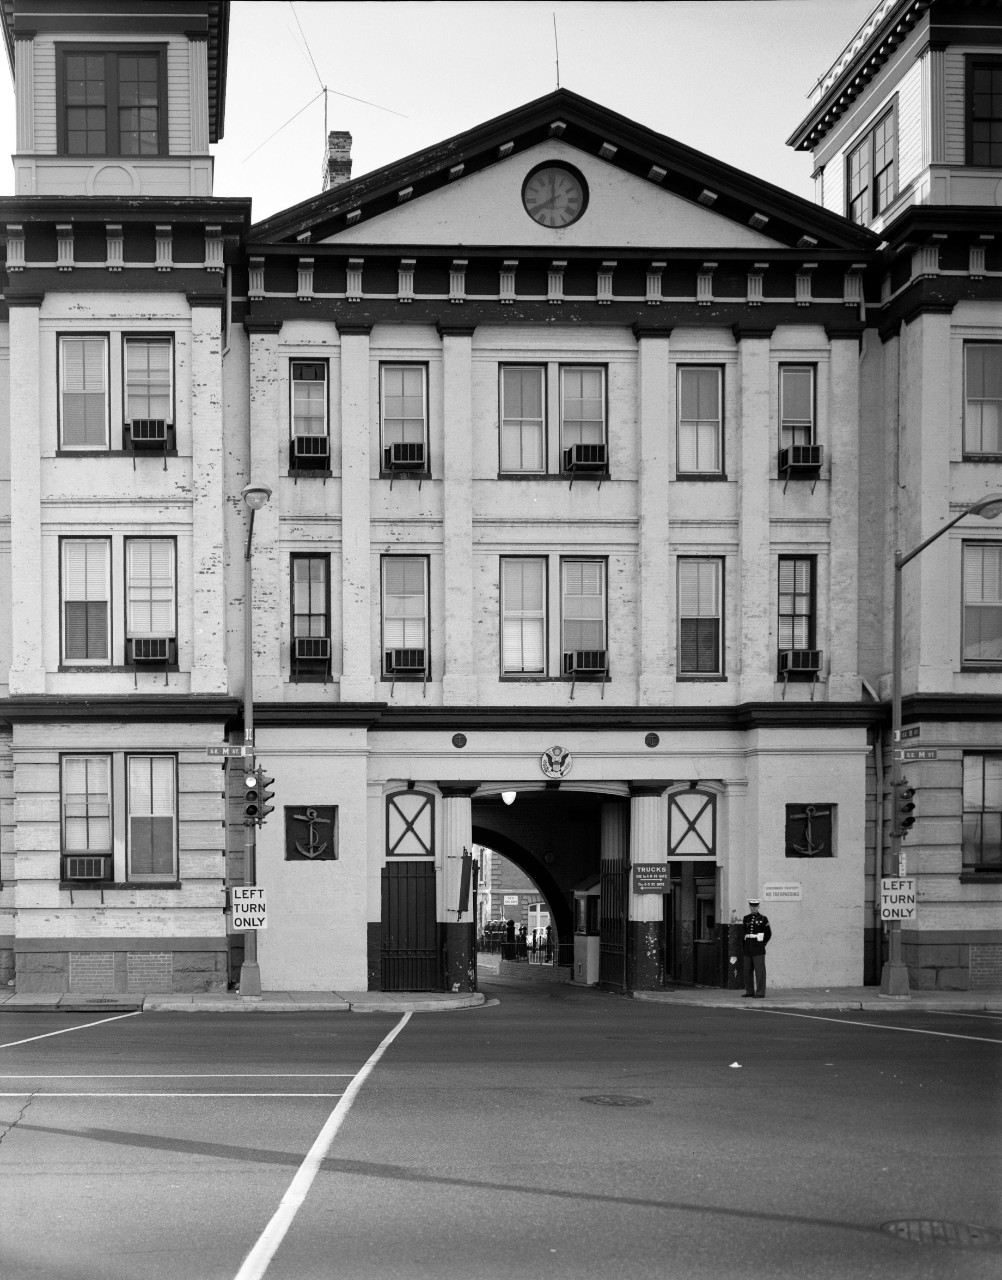 LC-DIG-HEC-030628:  Latrobe Gate, Washington Navy Yard, 1965.    Latrobe Gate and M Streets, Southeast, Washington, D.C., November 1965, Marc Blair of the Historic American Buildings Survey. Note, U.S. Marine standing guard.   Courtesy of the Library of Congress.  